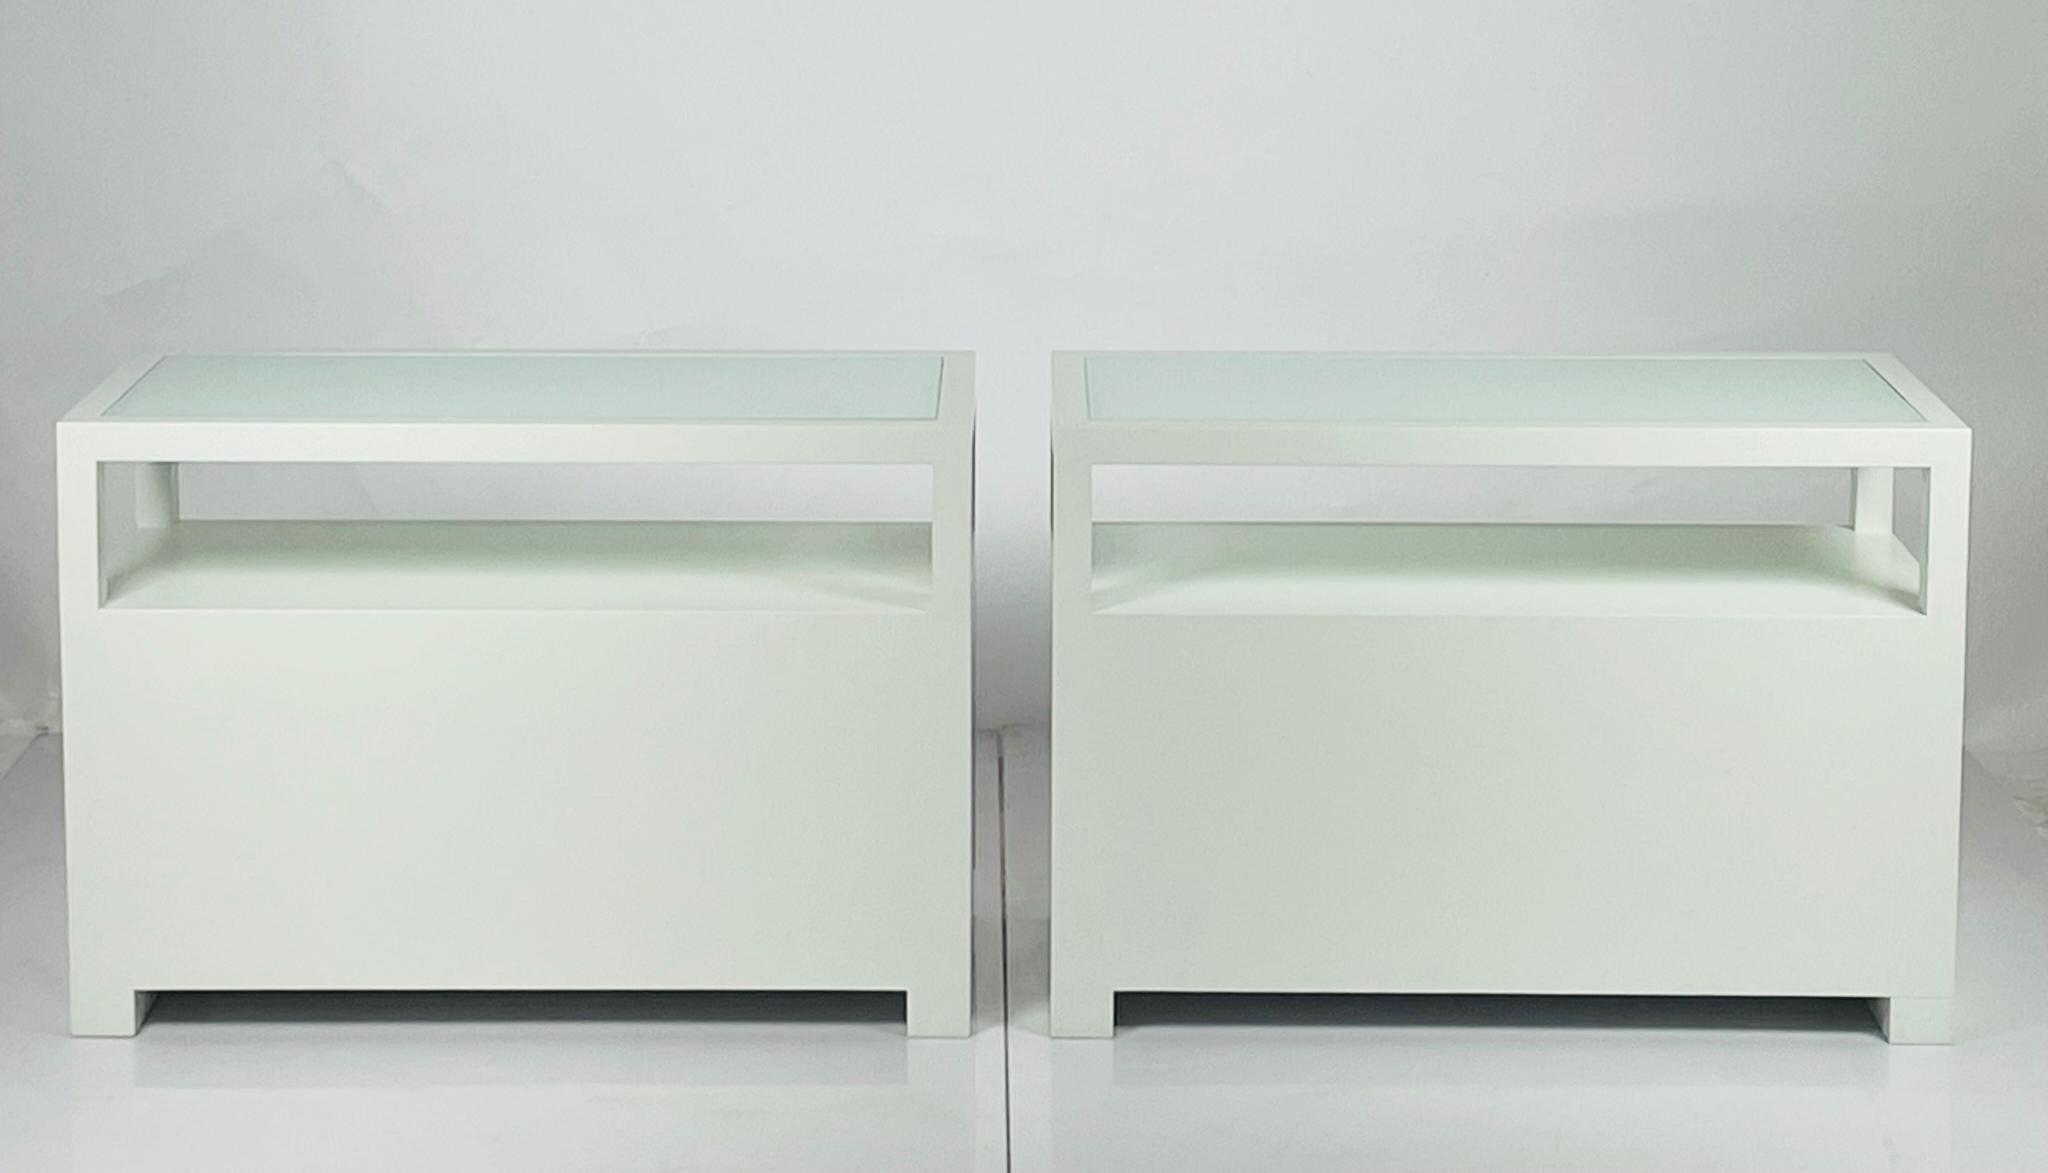 Introducing the Custom Nightstands in White Oak & Milk Glass by Cain Modern, USA 2023. These stunning nightstands are the perfect addition to any bedroom, offering both style and functionality.

Crafted from high-quality white oak and finished in